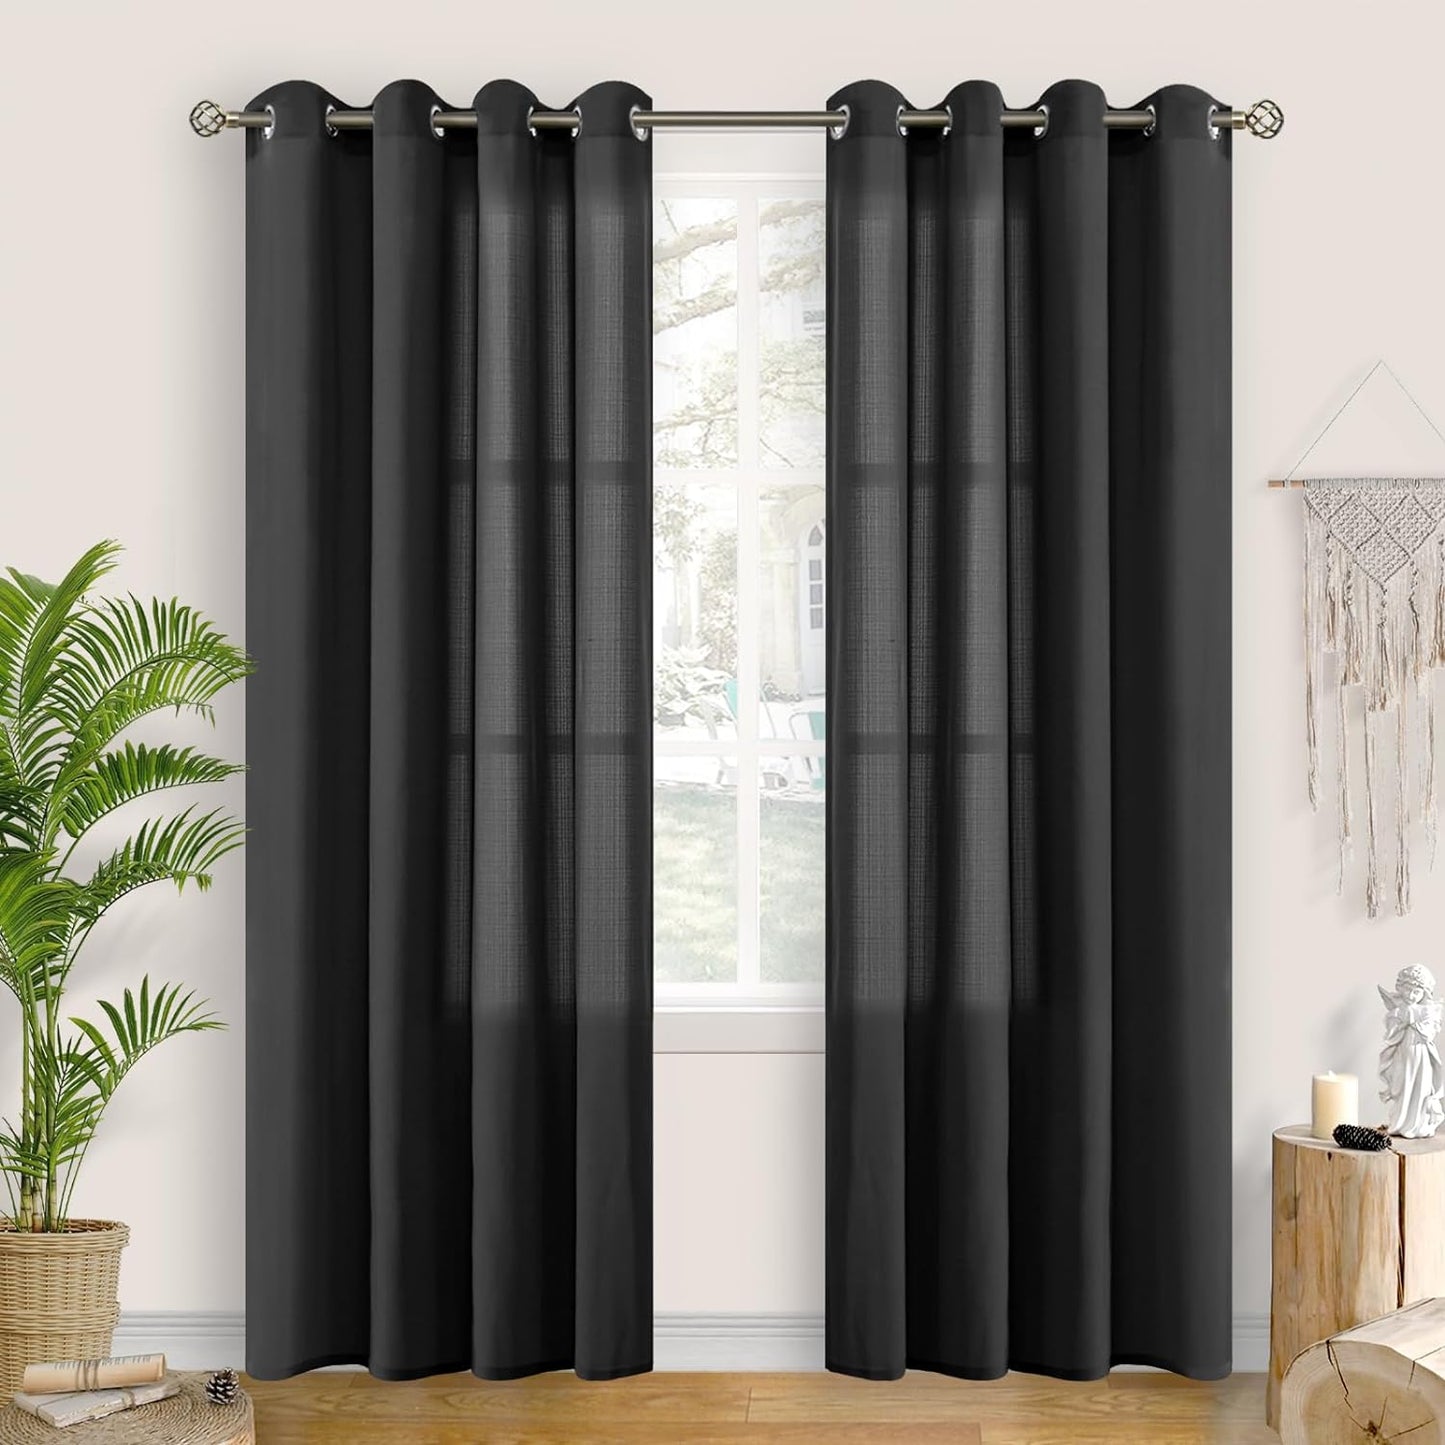 Bgment Natural Linen Look Semi Sheer Curtains for Bedroom, 52 X 54 Inch White Grommet Light Filtering Casual Textured Privacy Curtains for Bay Window, 2 Panels  BGment Black 52W X 95L 